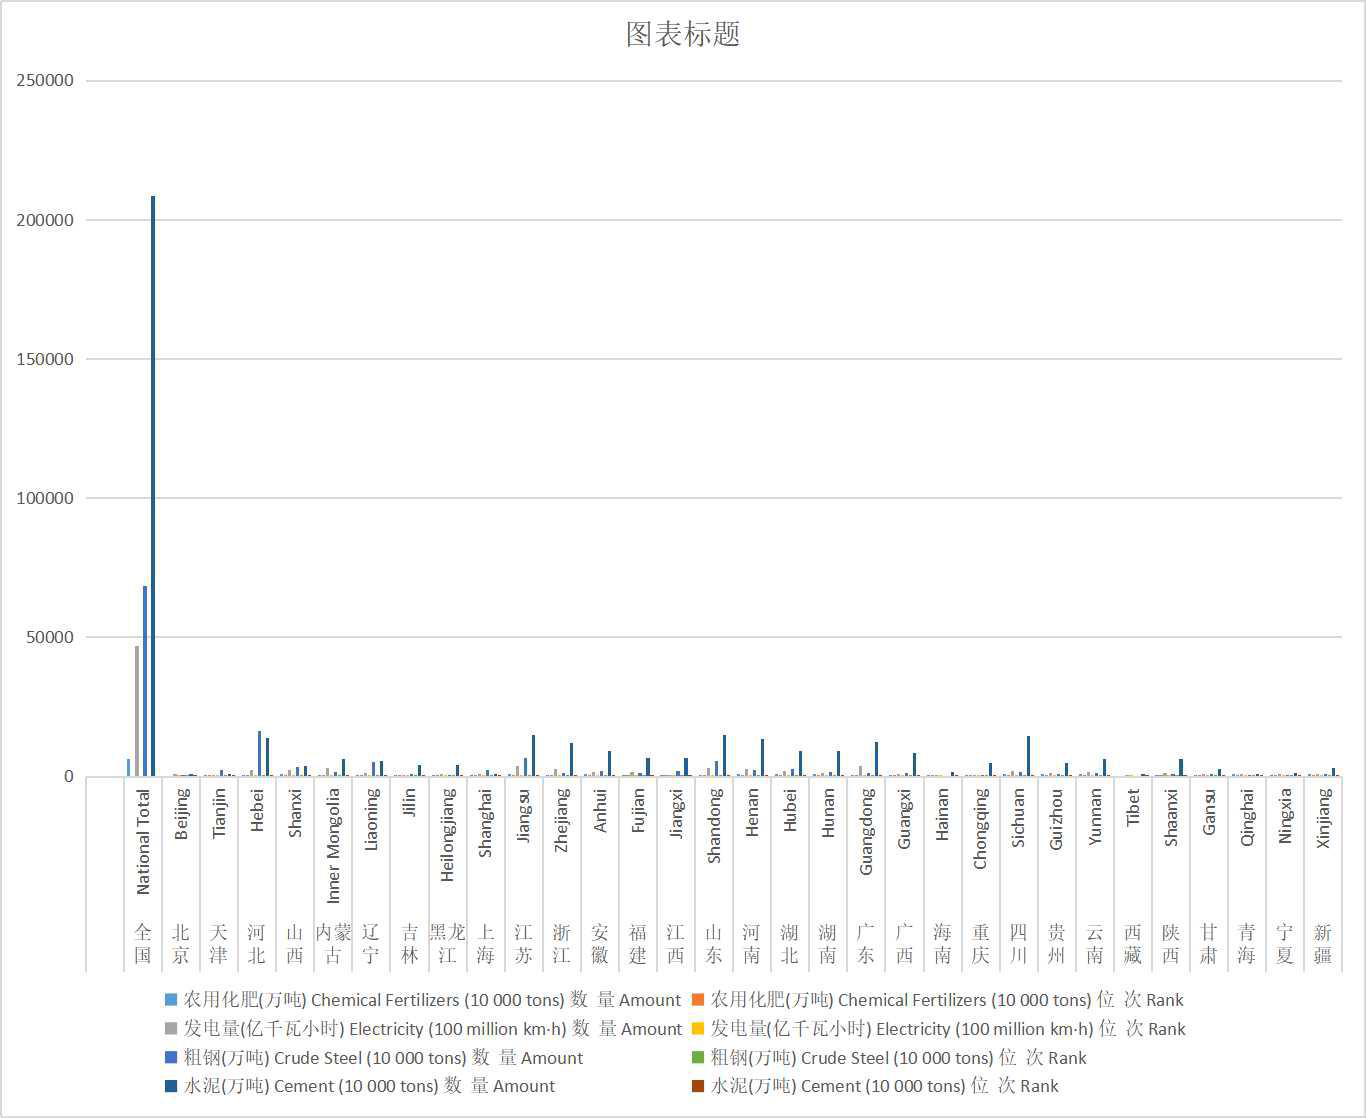 Output and ranking of main products of industrial enterprises in various regions of China (2001-2010)